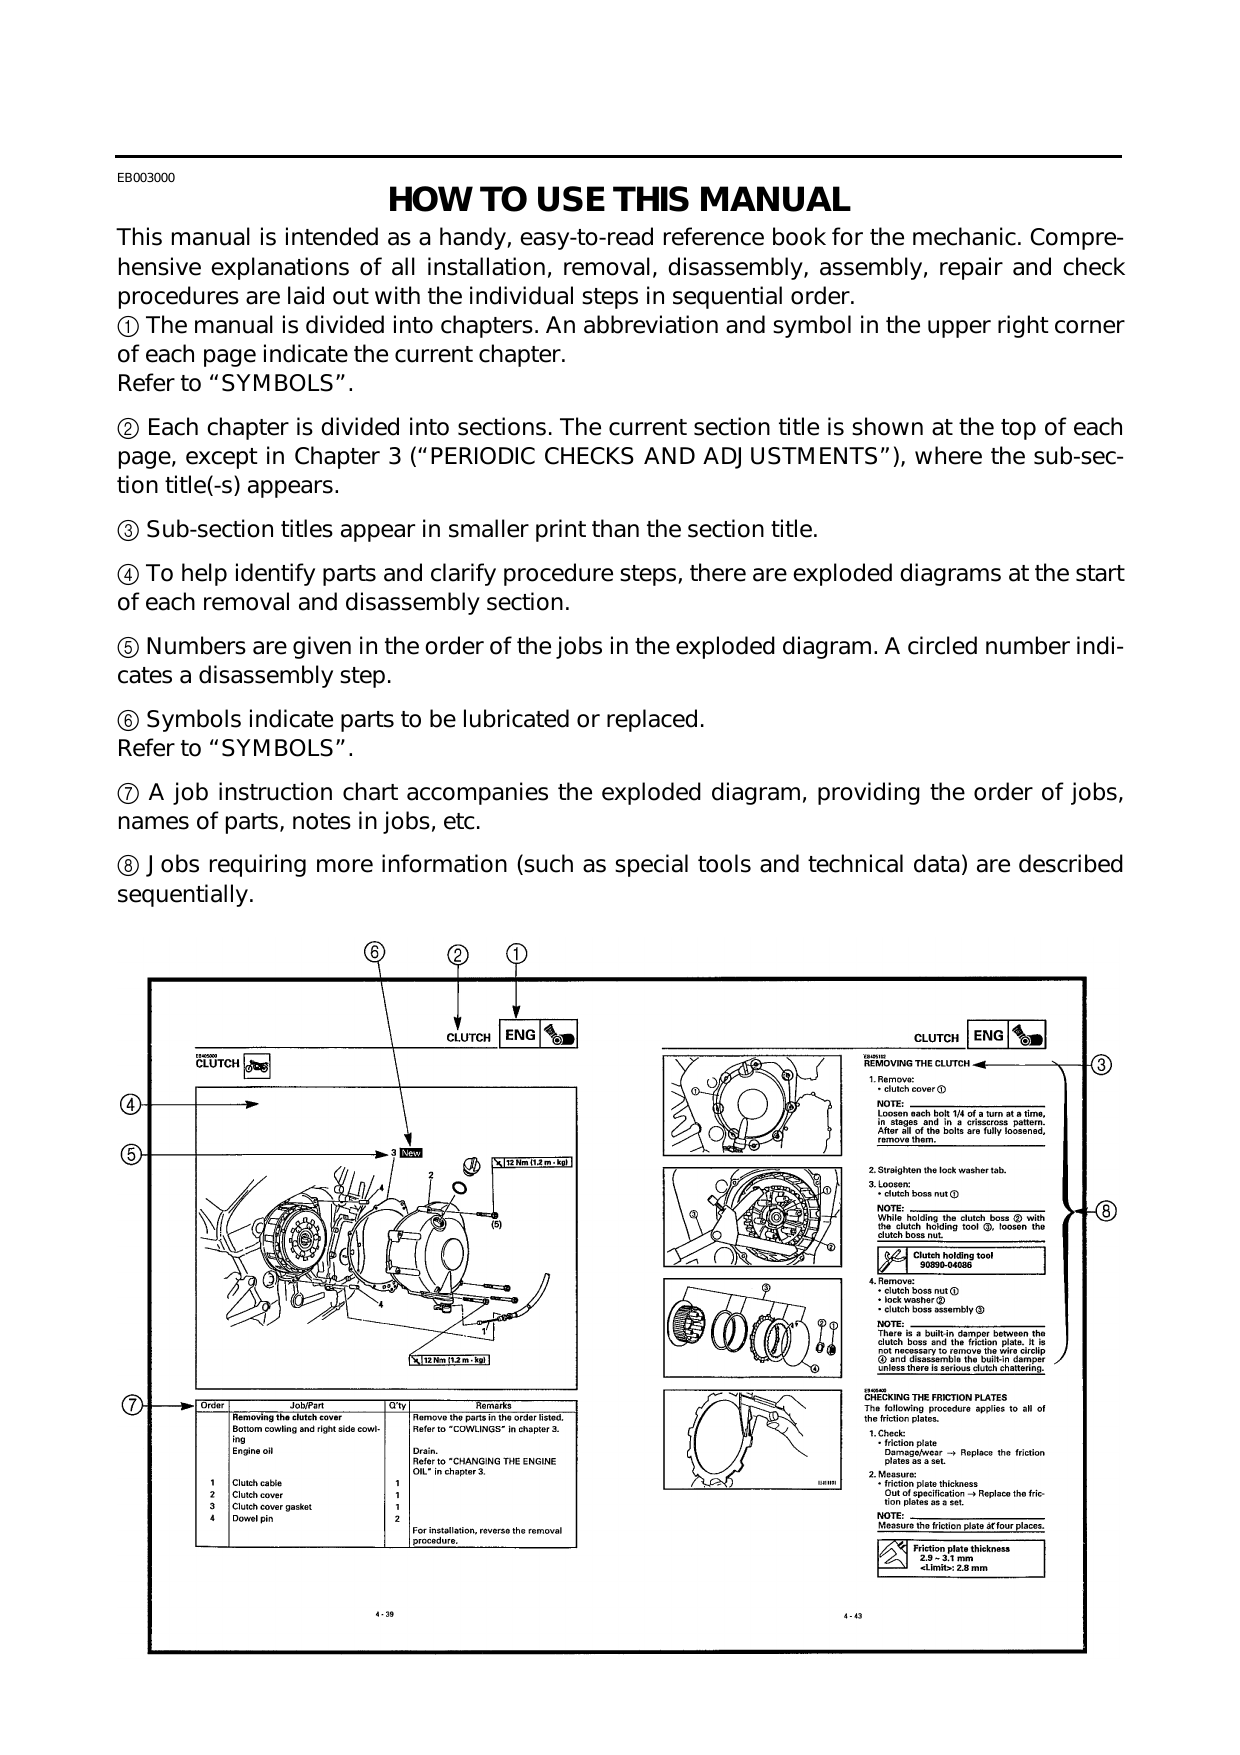 1998-2002 Yamaha YZF-R1 service manual Preview image 3